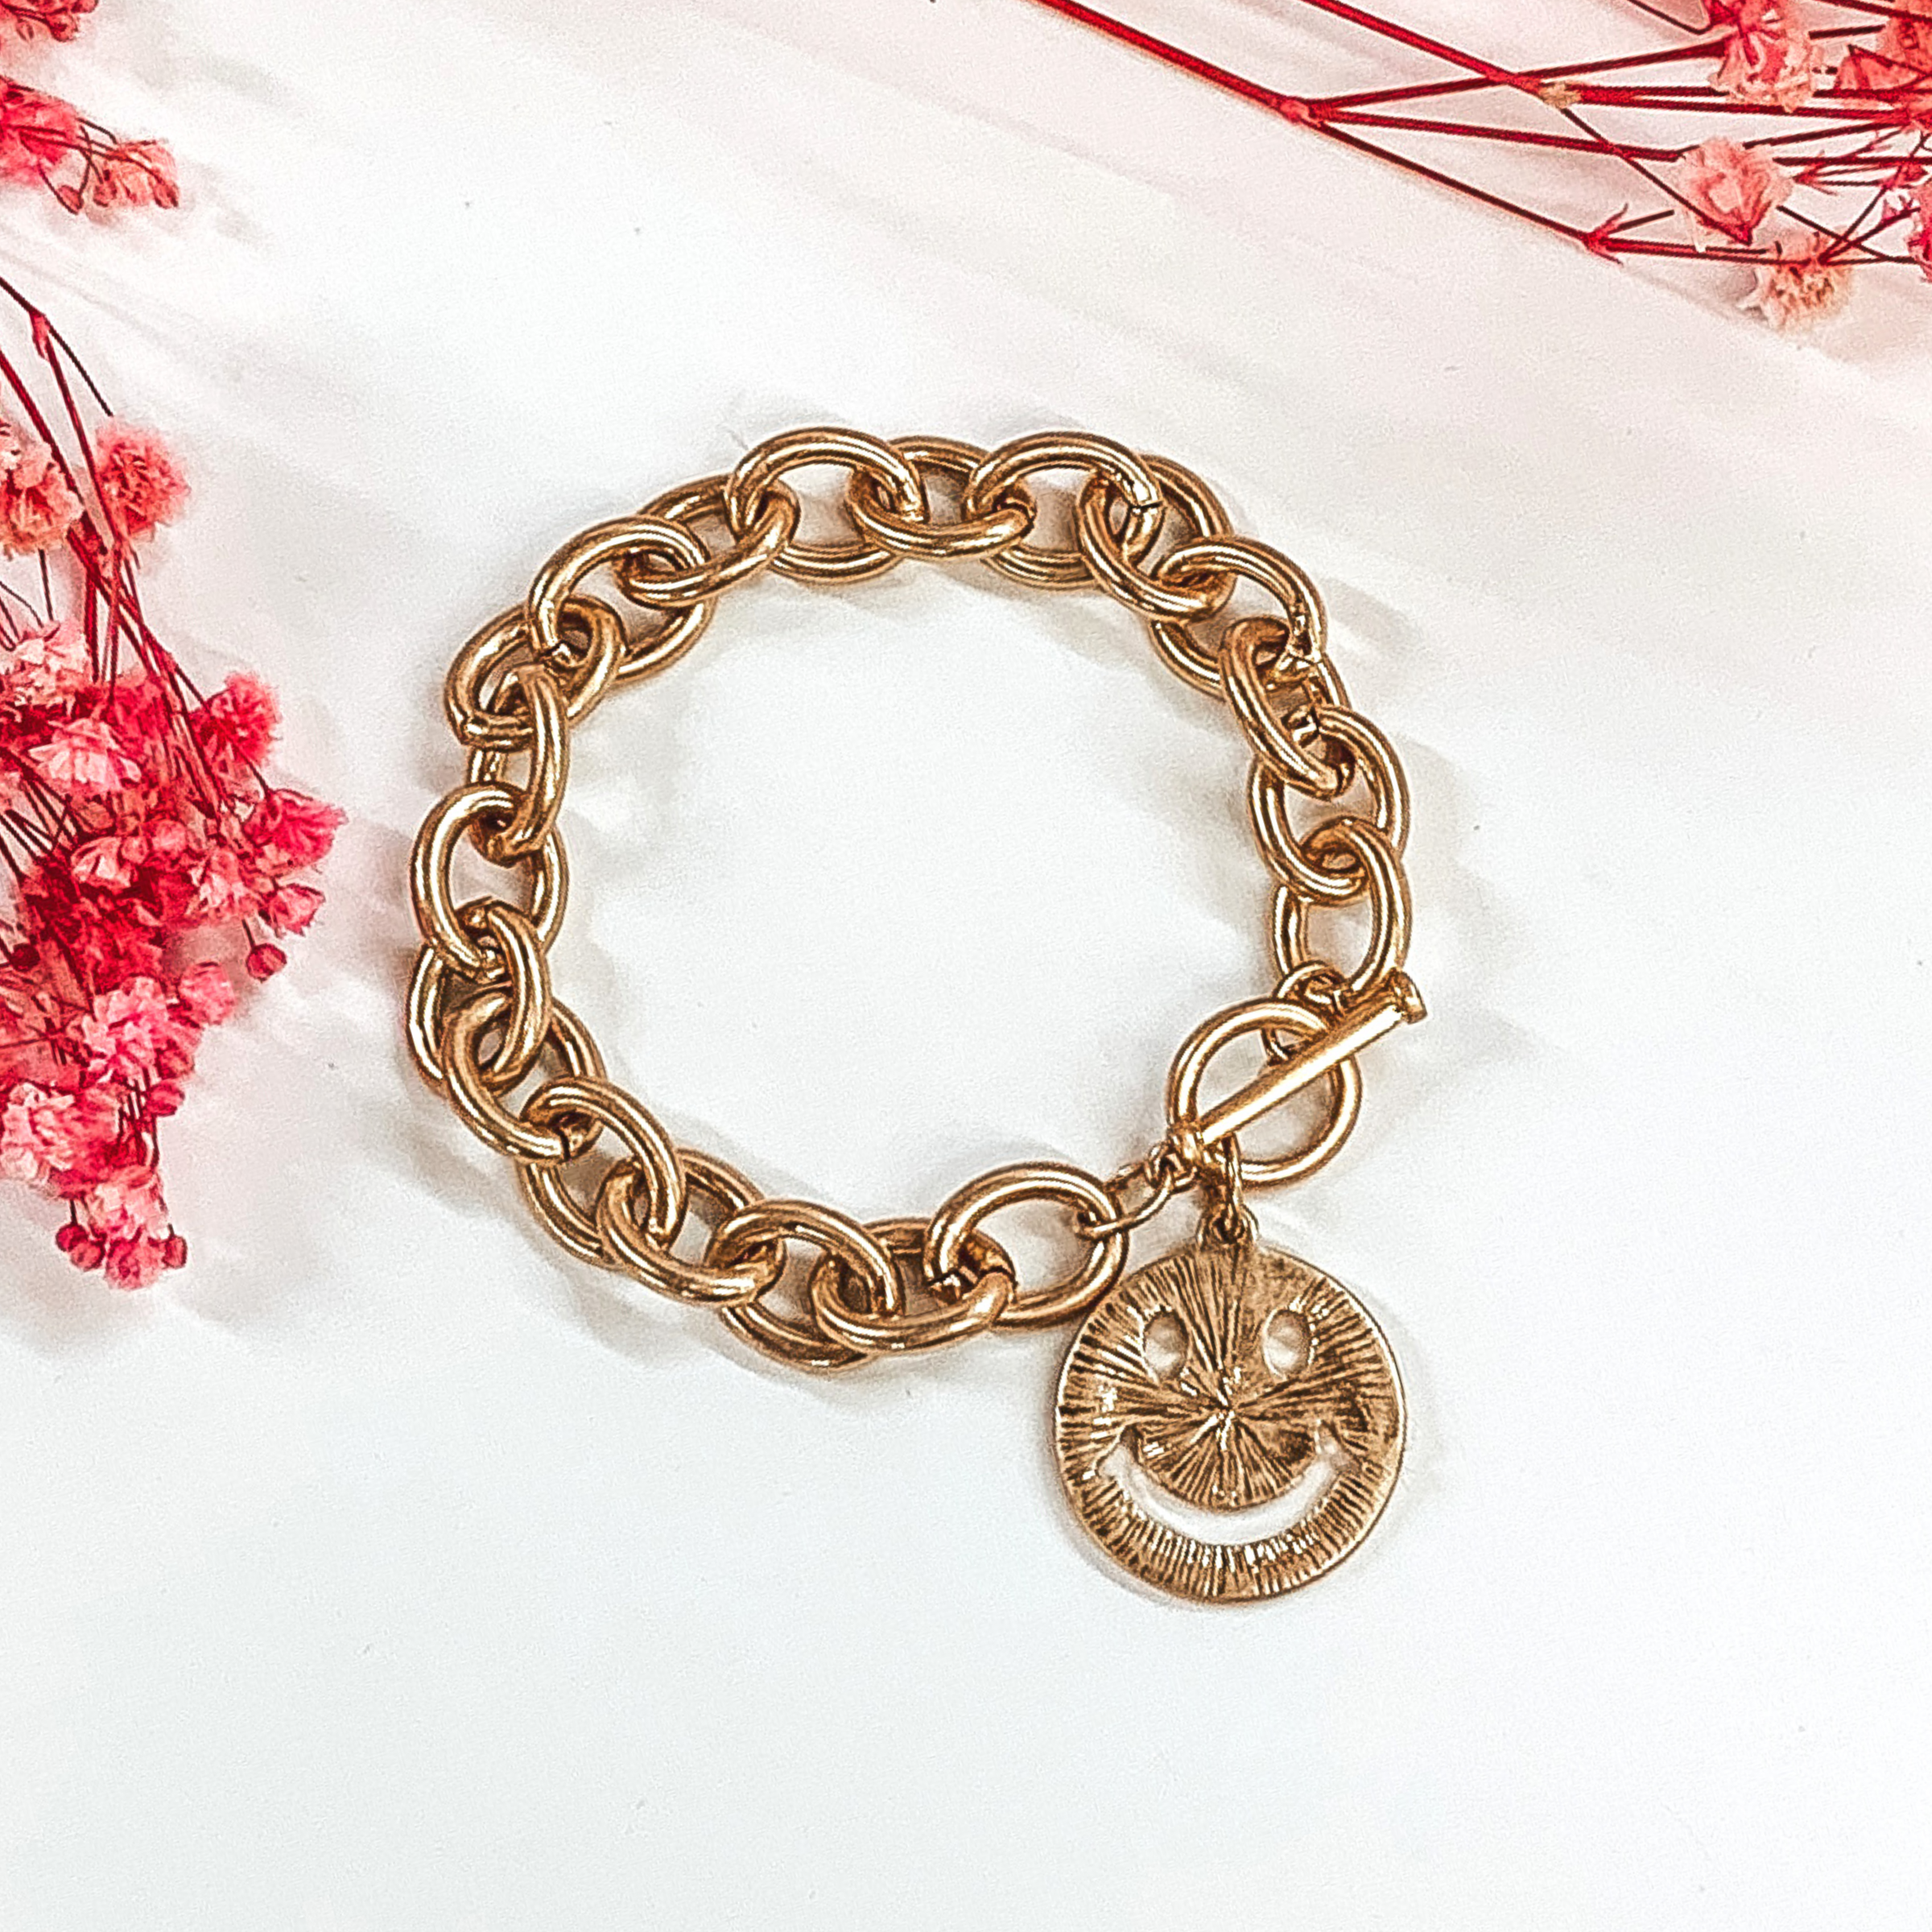 Happy Face Chained Bracelet in Gold - Giddy Up Glamour Boutique